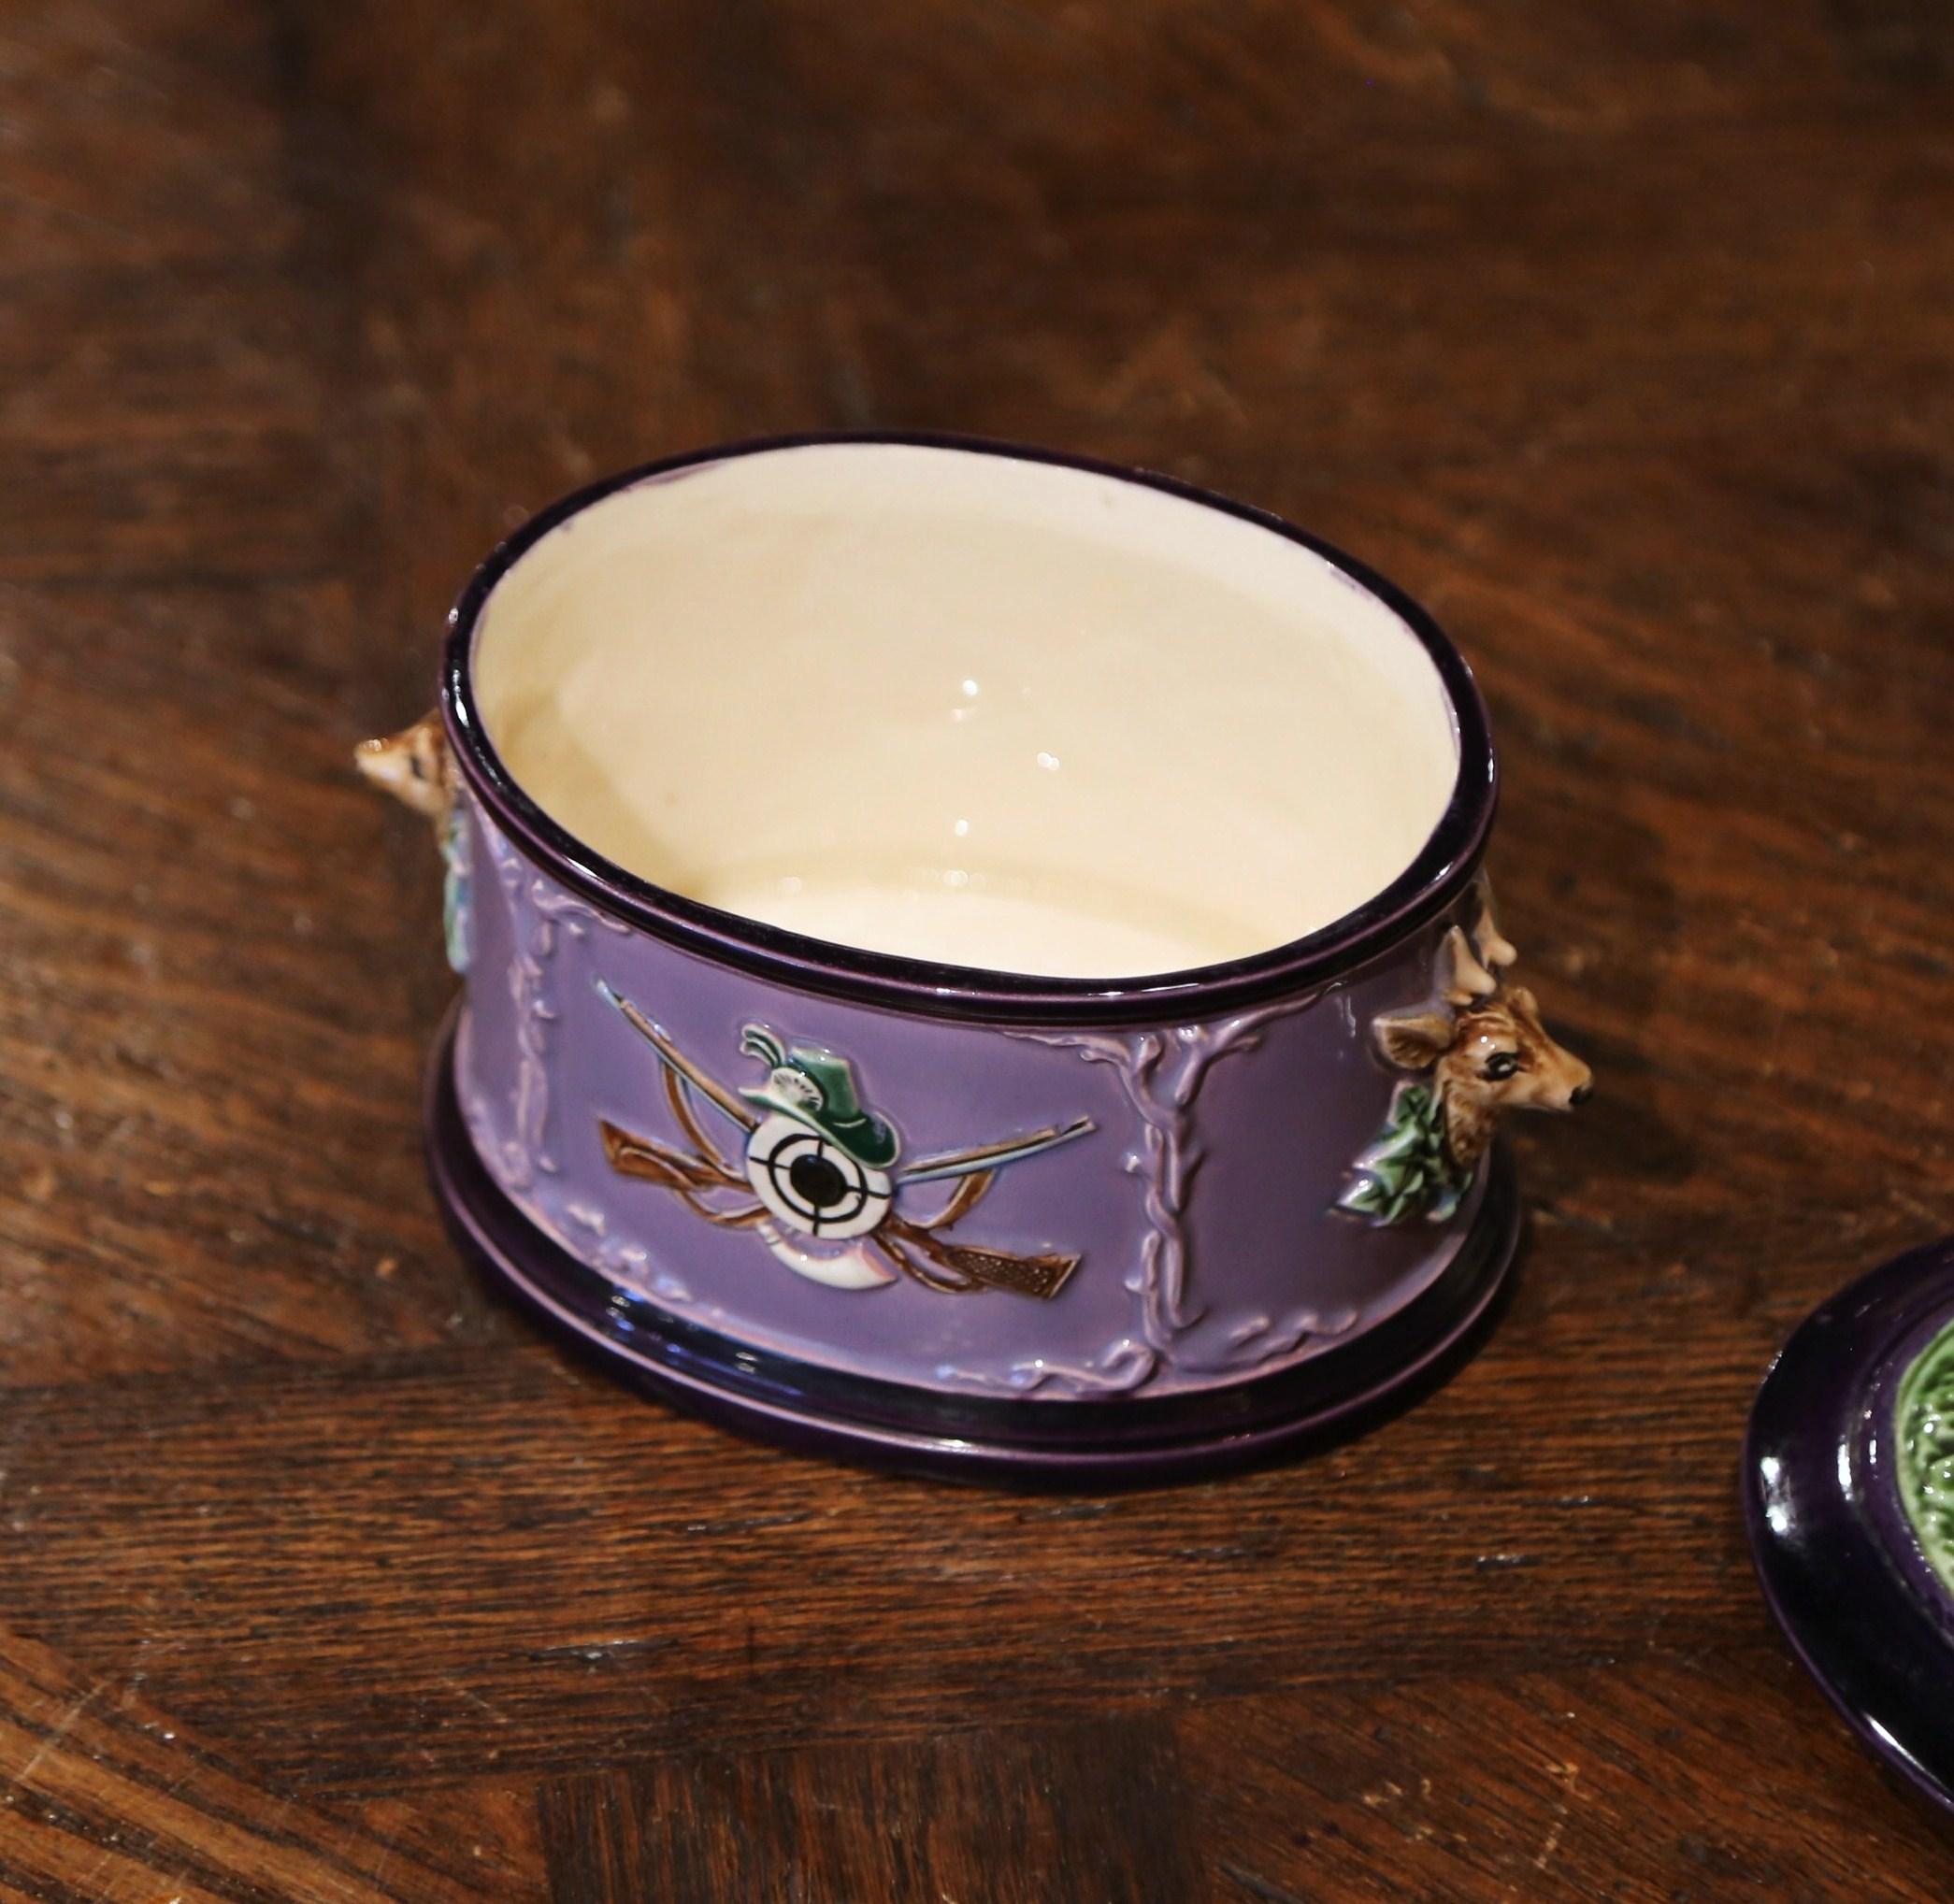 19th Century Czech Painted Ceramic Barbotine Hunt Decor Sugar Bowl with Lid 5